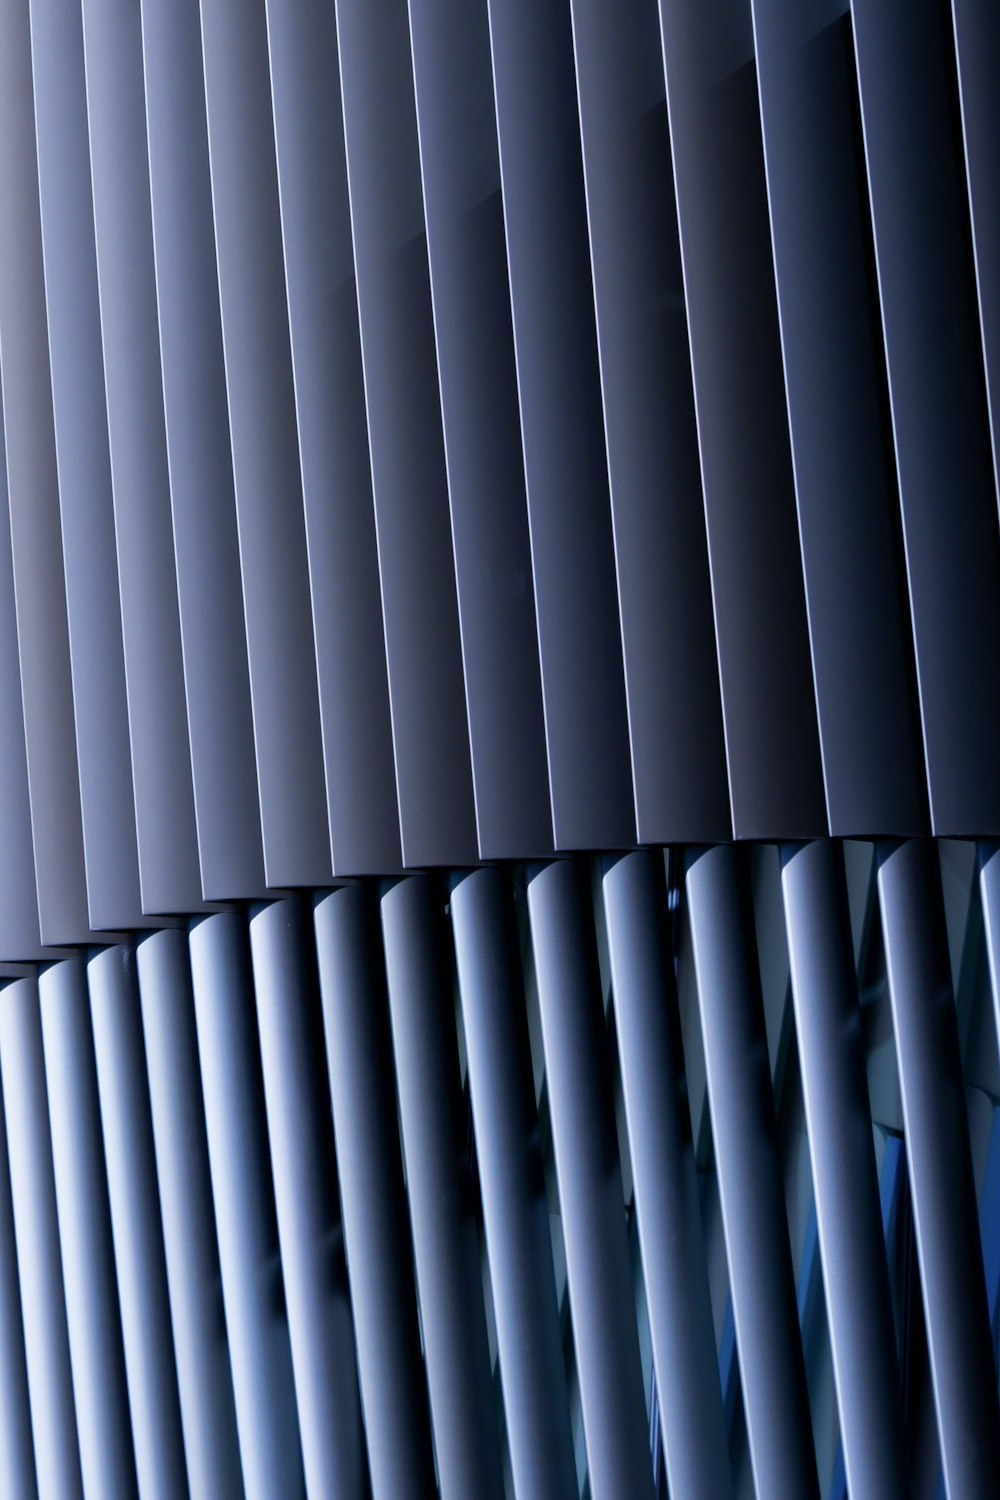 a close up of a metal radiator in a building